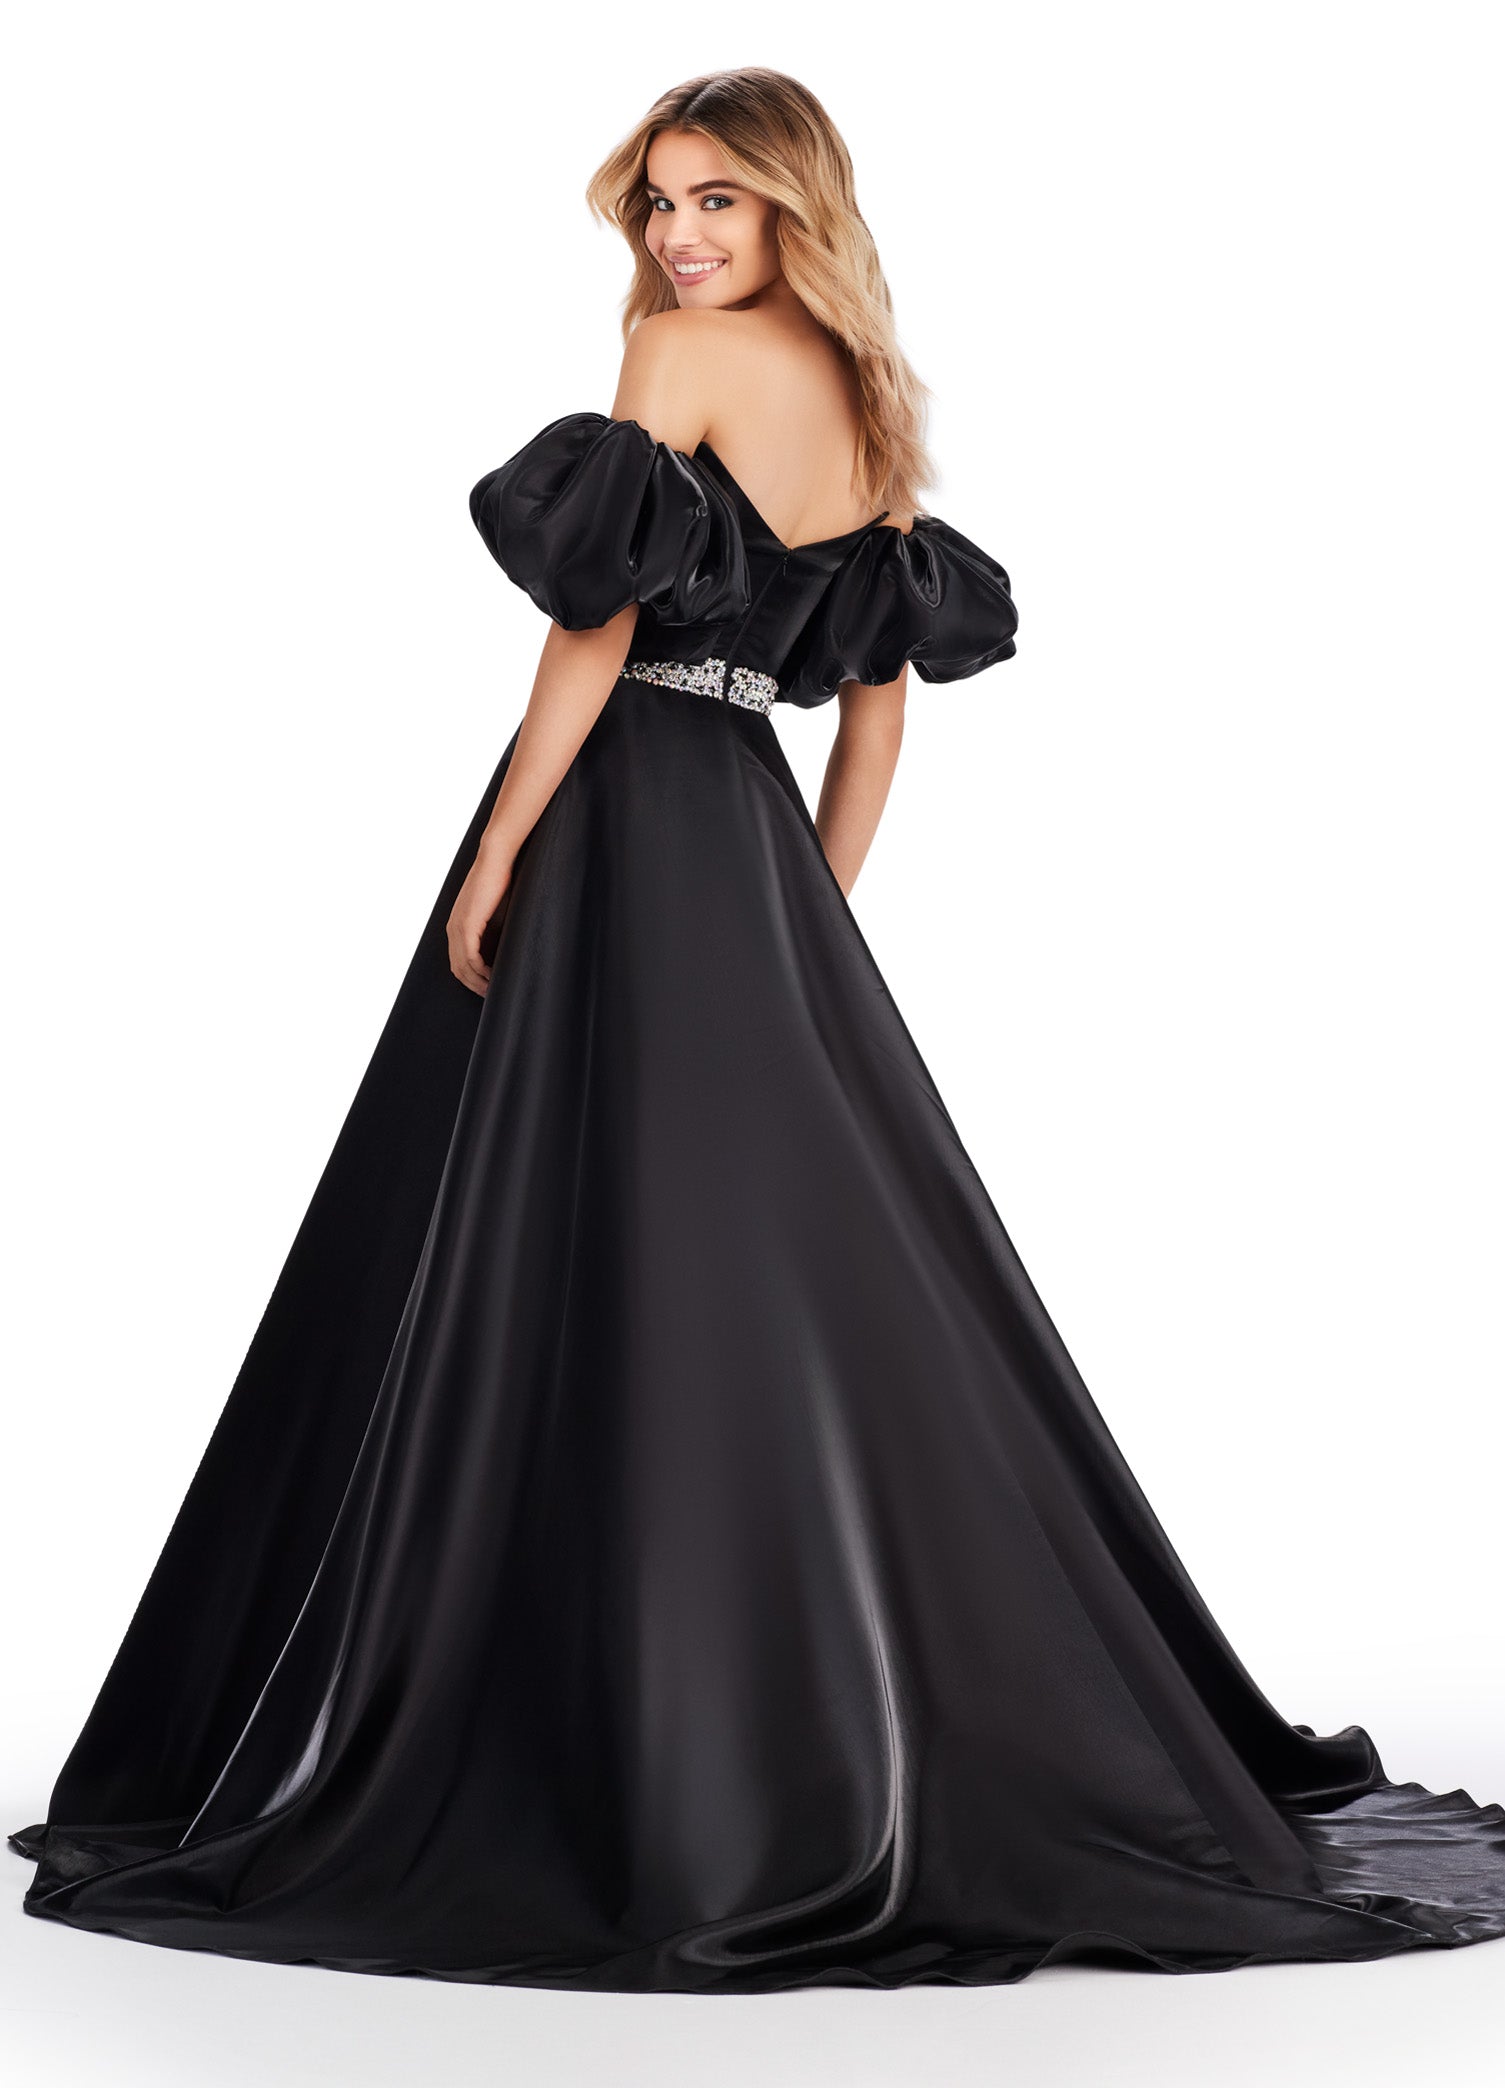 Elevate your formal look with the Ashley Lauren 11474 Long Prom Dress. This elegant strapless satin ball gown boasts a beaded belt, detachable puff sleeves, and a timeless pageant-style design. Perfect for making a statement at any event, this dress exudes sophistication and style. Be memorable in this strapless satin ball gown. This dress features a beaded belt detail, a left leg slit and detachable puff sleeves.